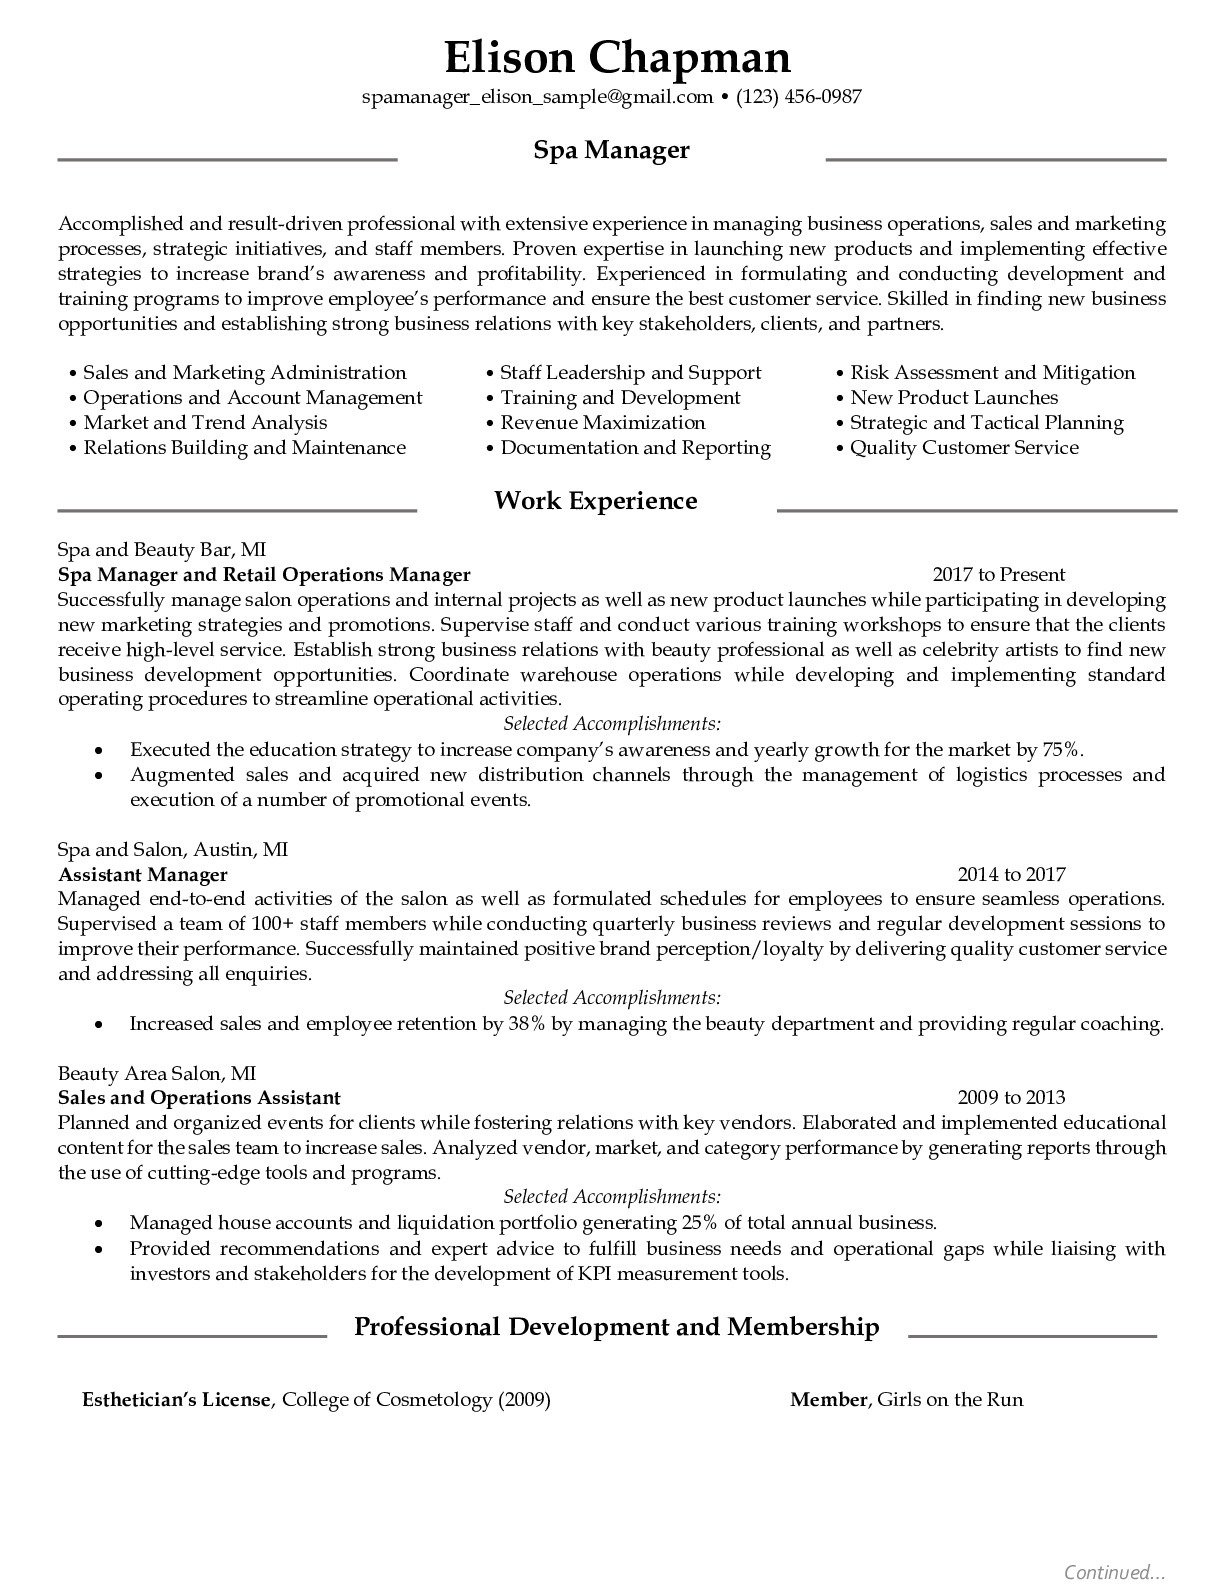 Resume Example for Spa Manager